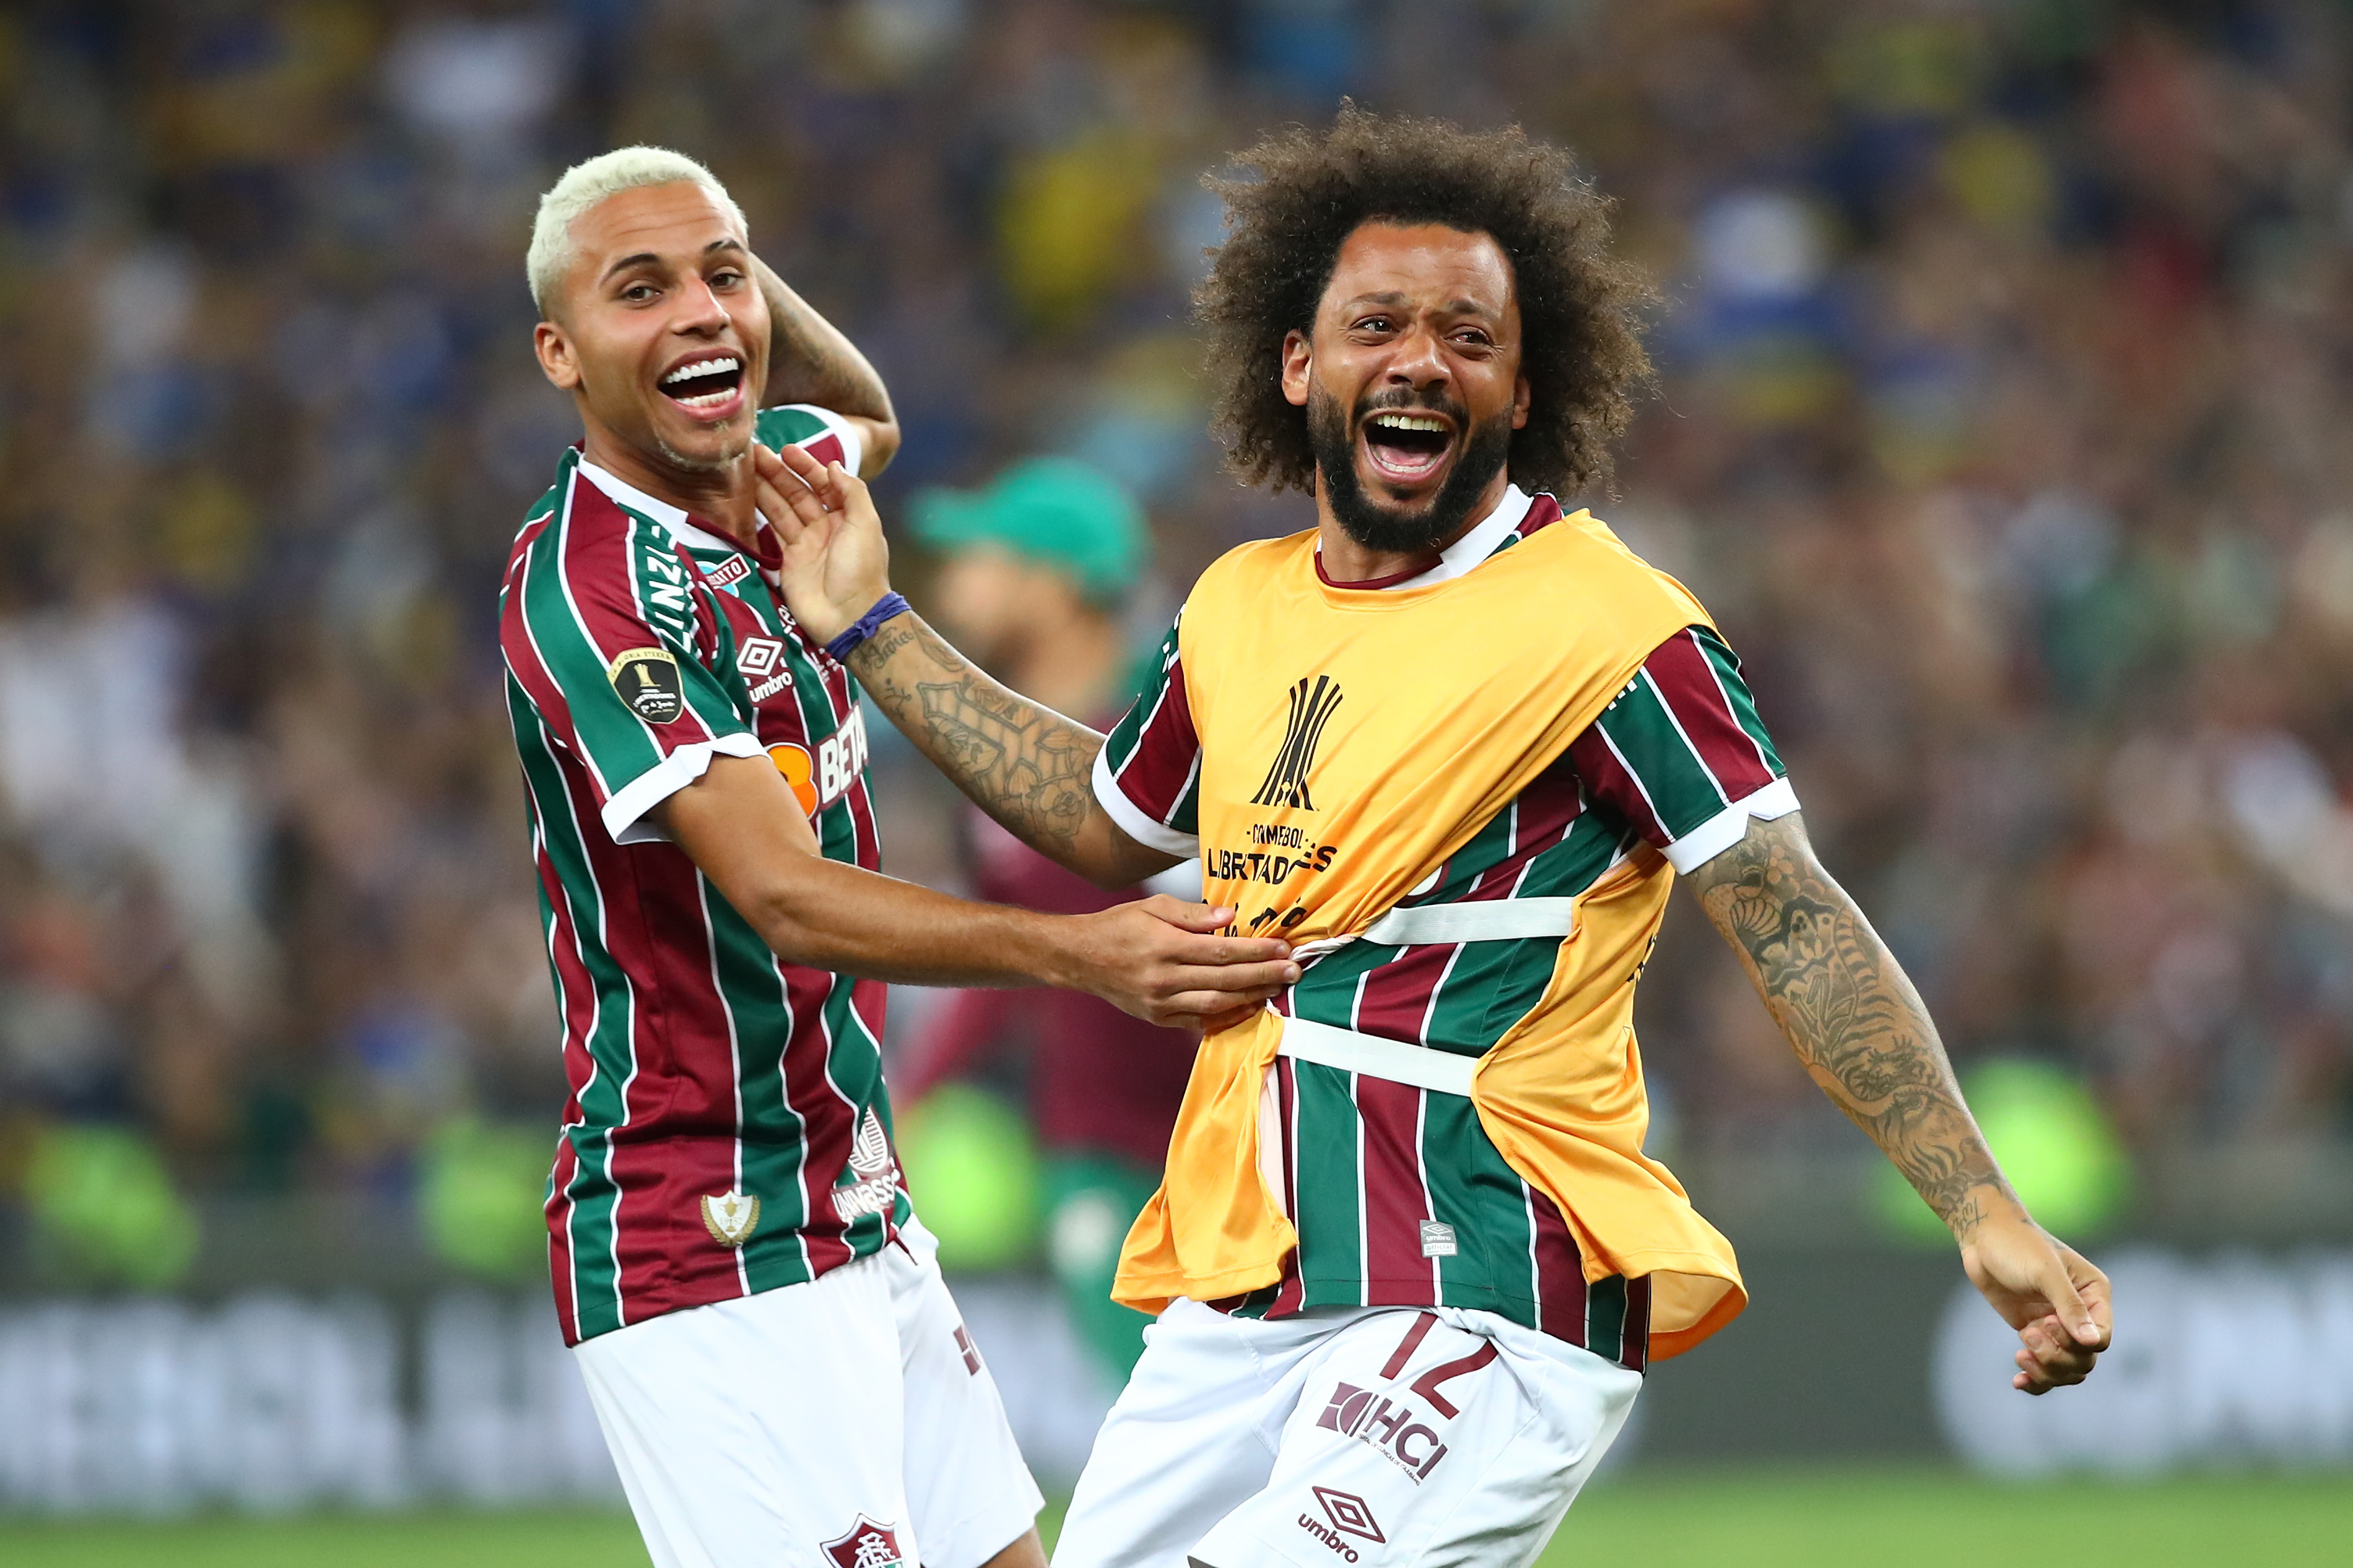 Marcelo was overcome with emotion after helping Fluminense win their first ever Copa Libertadores title